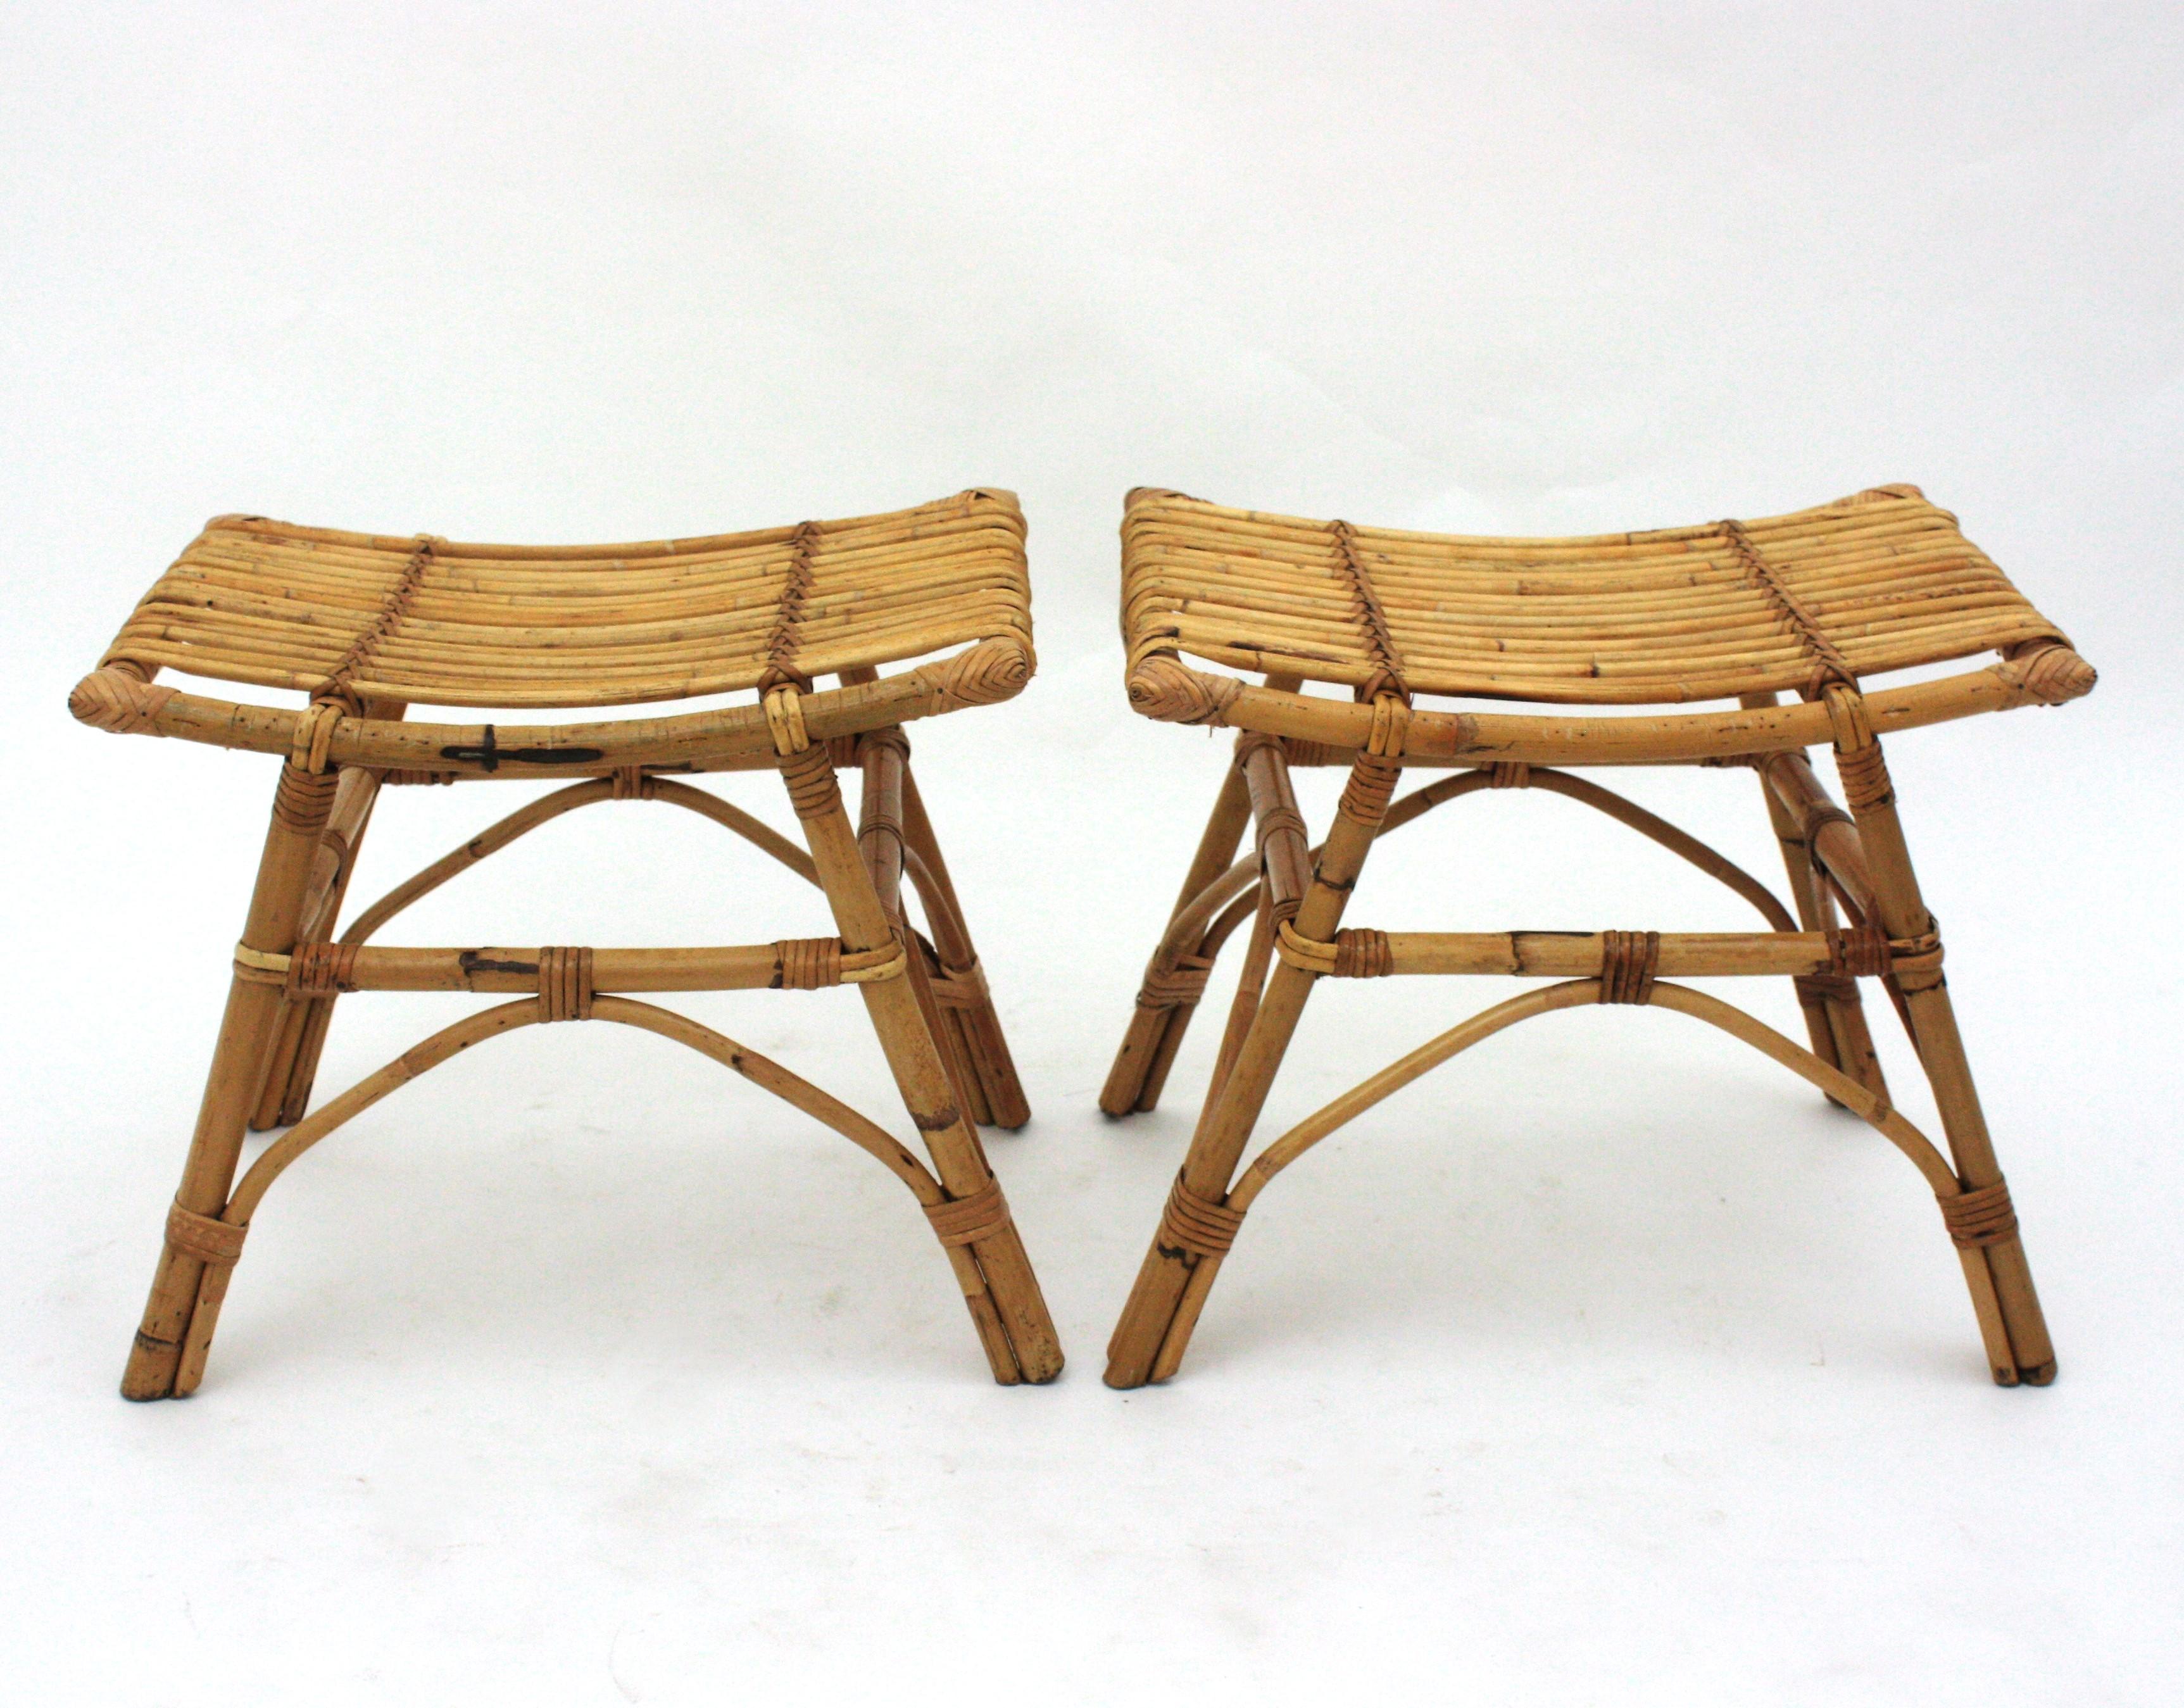 Pair of Bamboo Rattan Stools or Side Tables, 1960s For Sale 2